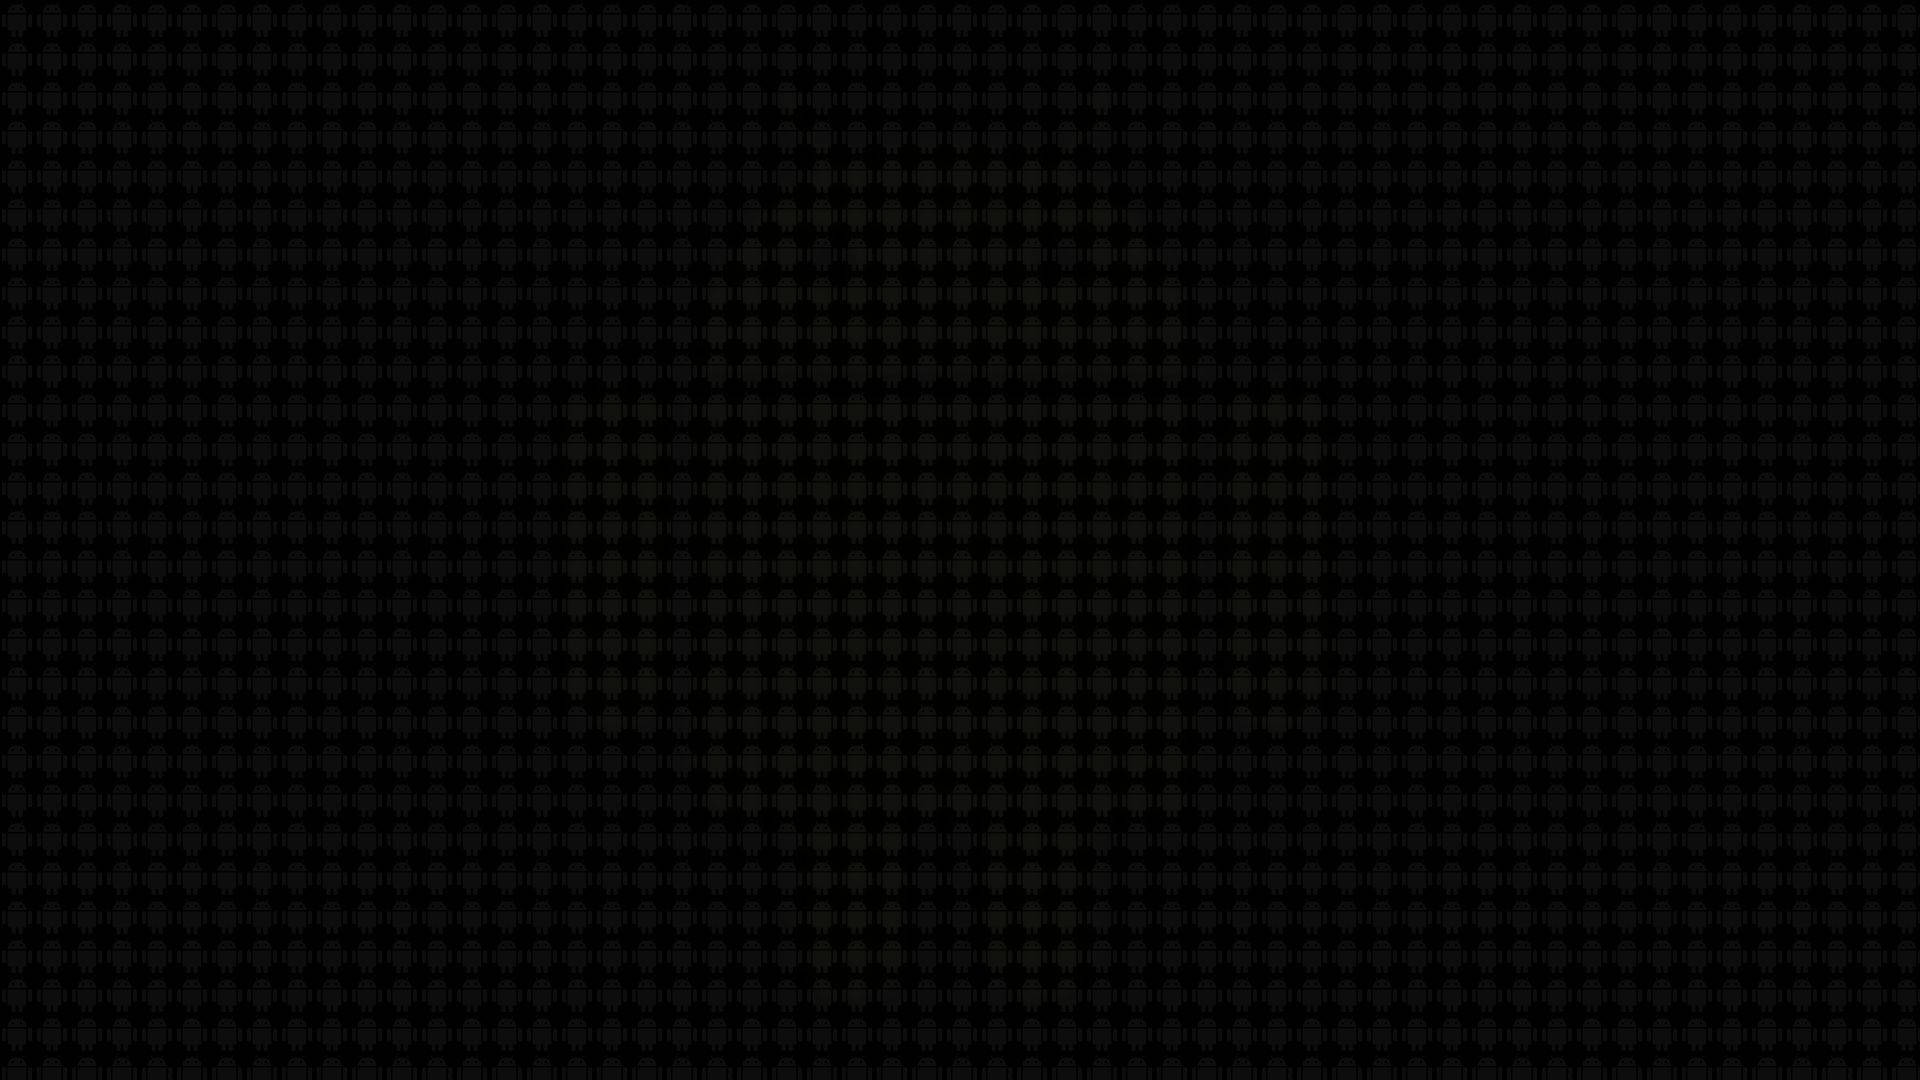 Black Android Grid Pattern Background